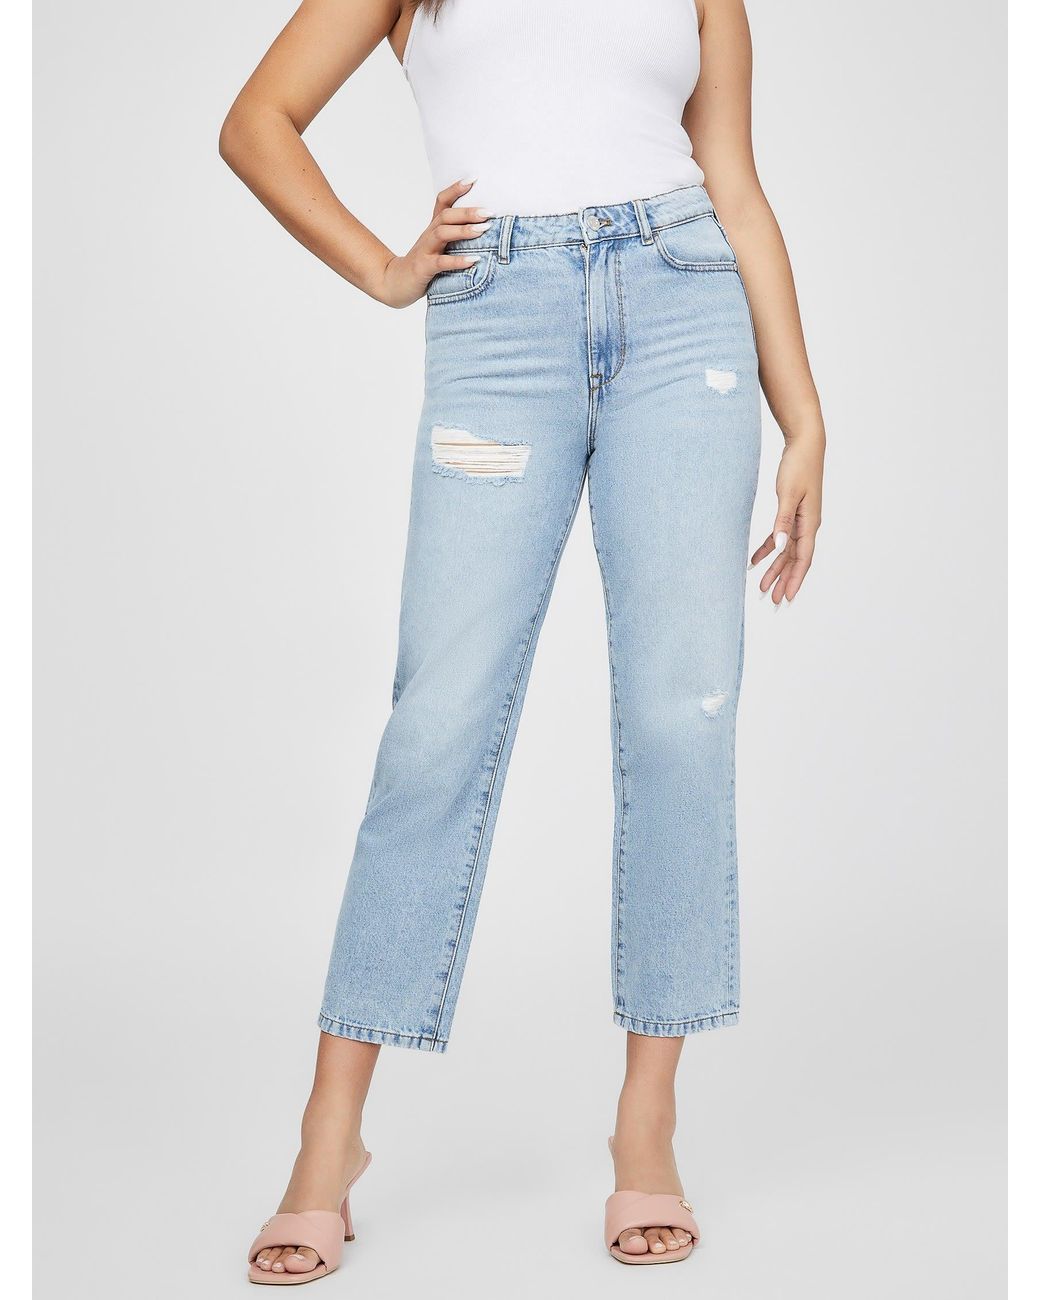 Guess Factory Flora Distressed Straight Jeans in Blue | Lyst